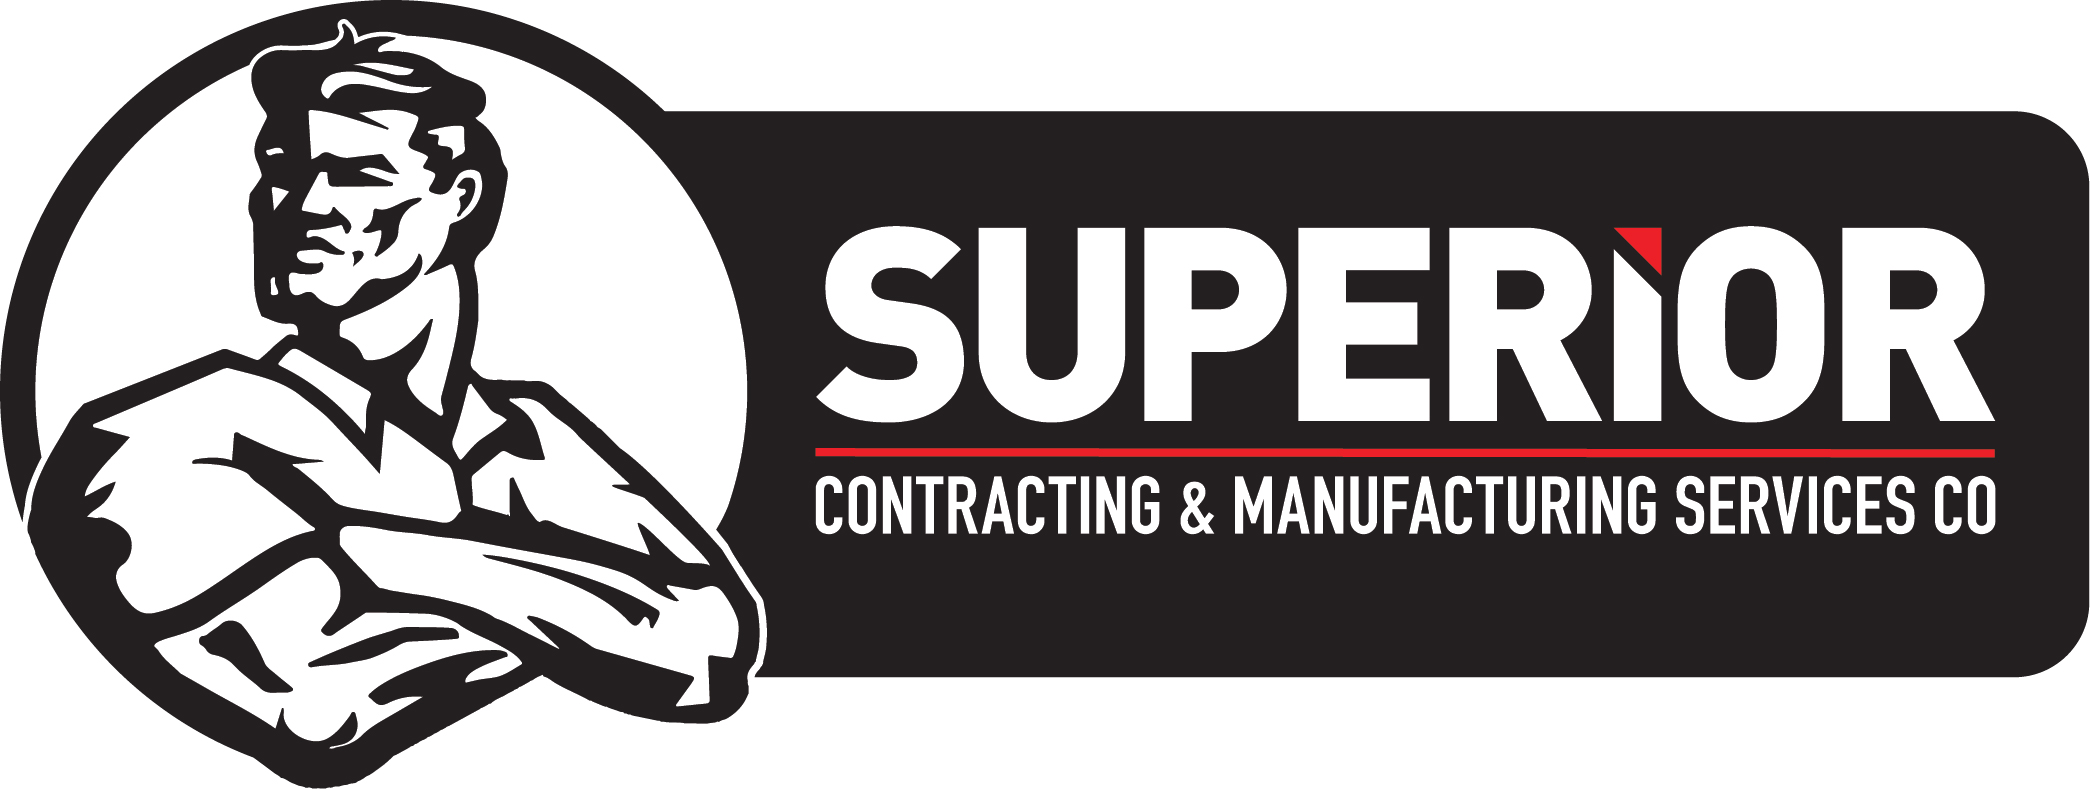 Superior Contracting & Manufacturing Services Co.  